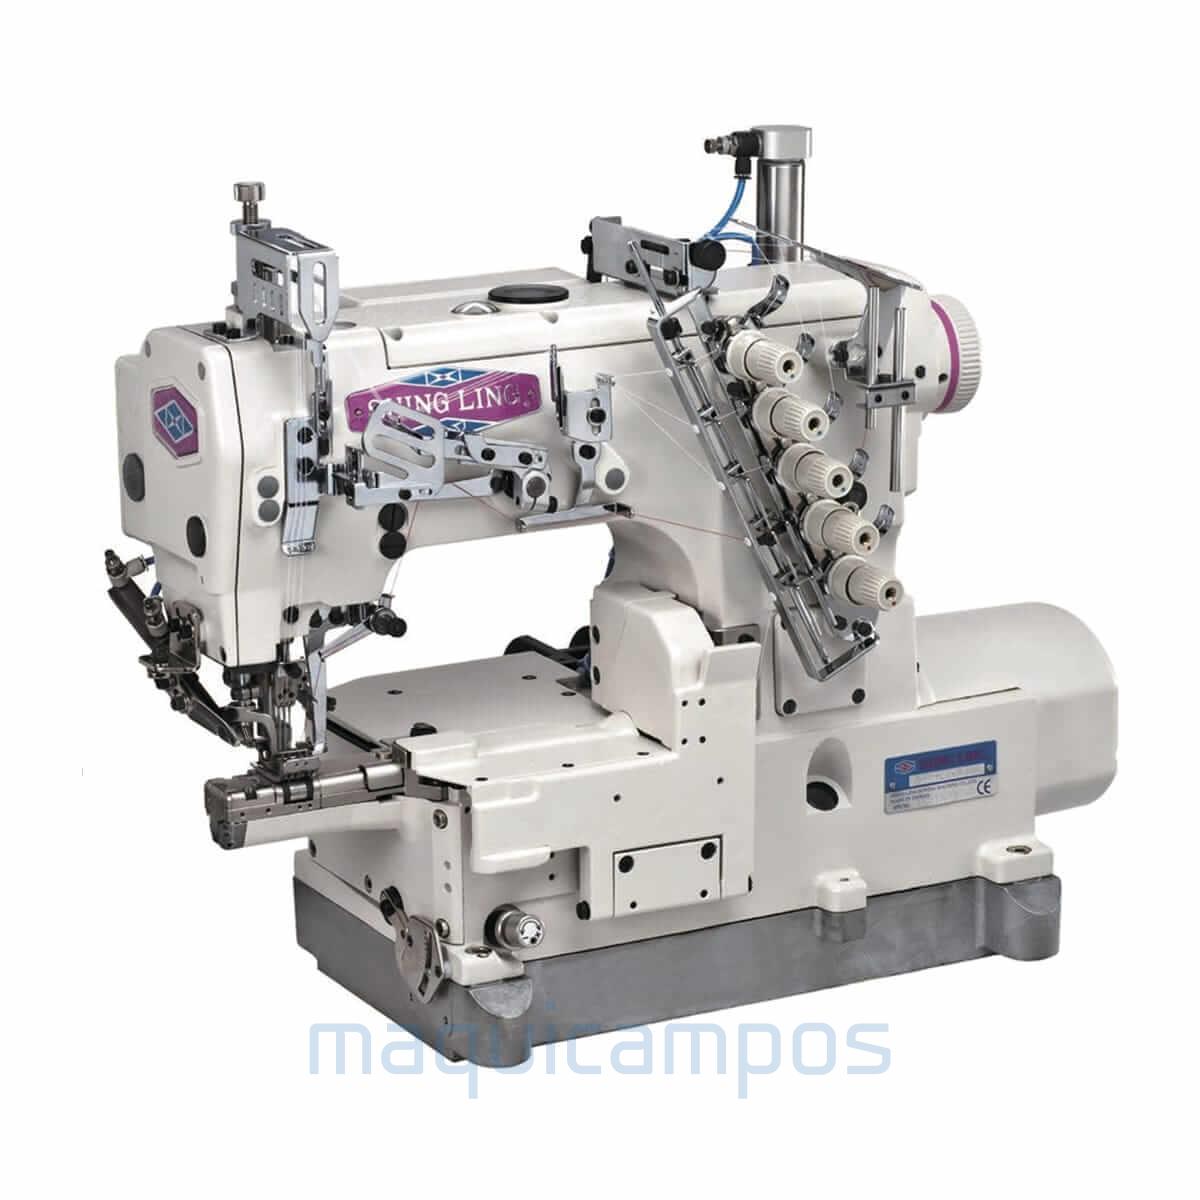 Shing Ling VG-999ES-AST-TF-DS Interlock Sewing Machine Extremely Small Cylinder-bed